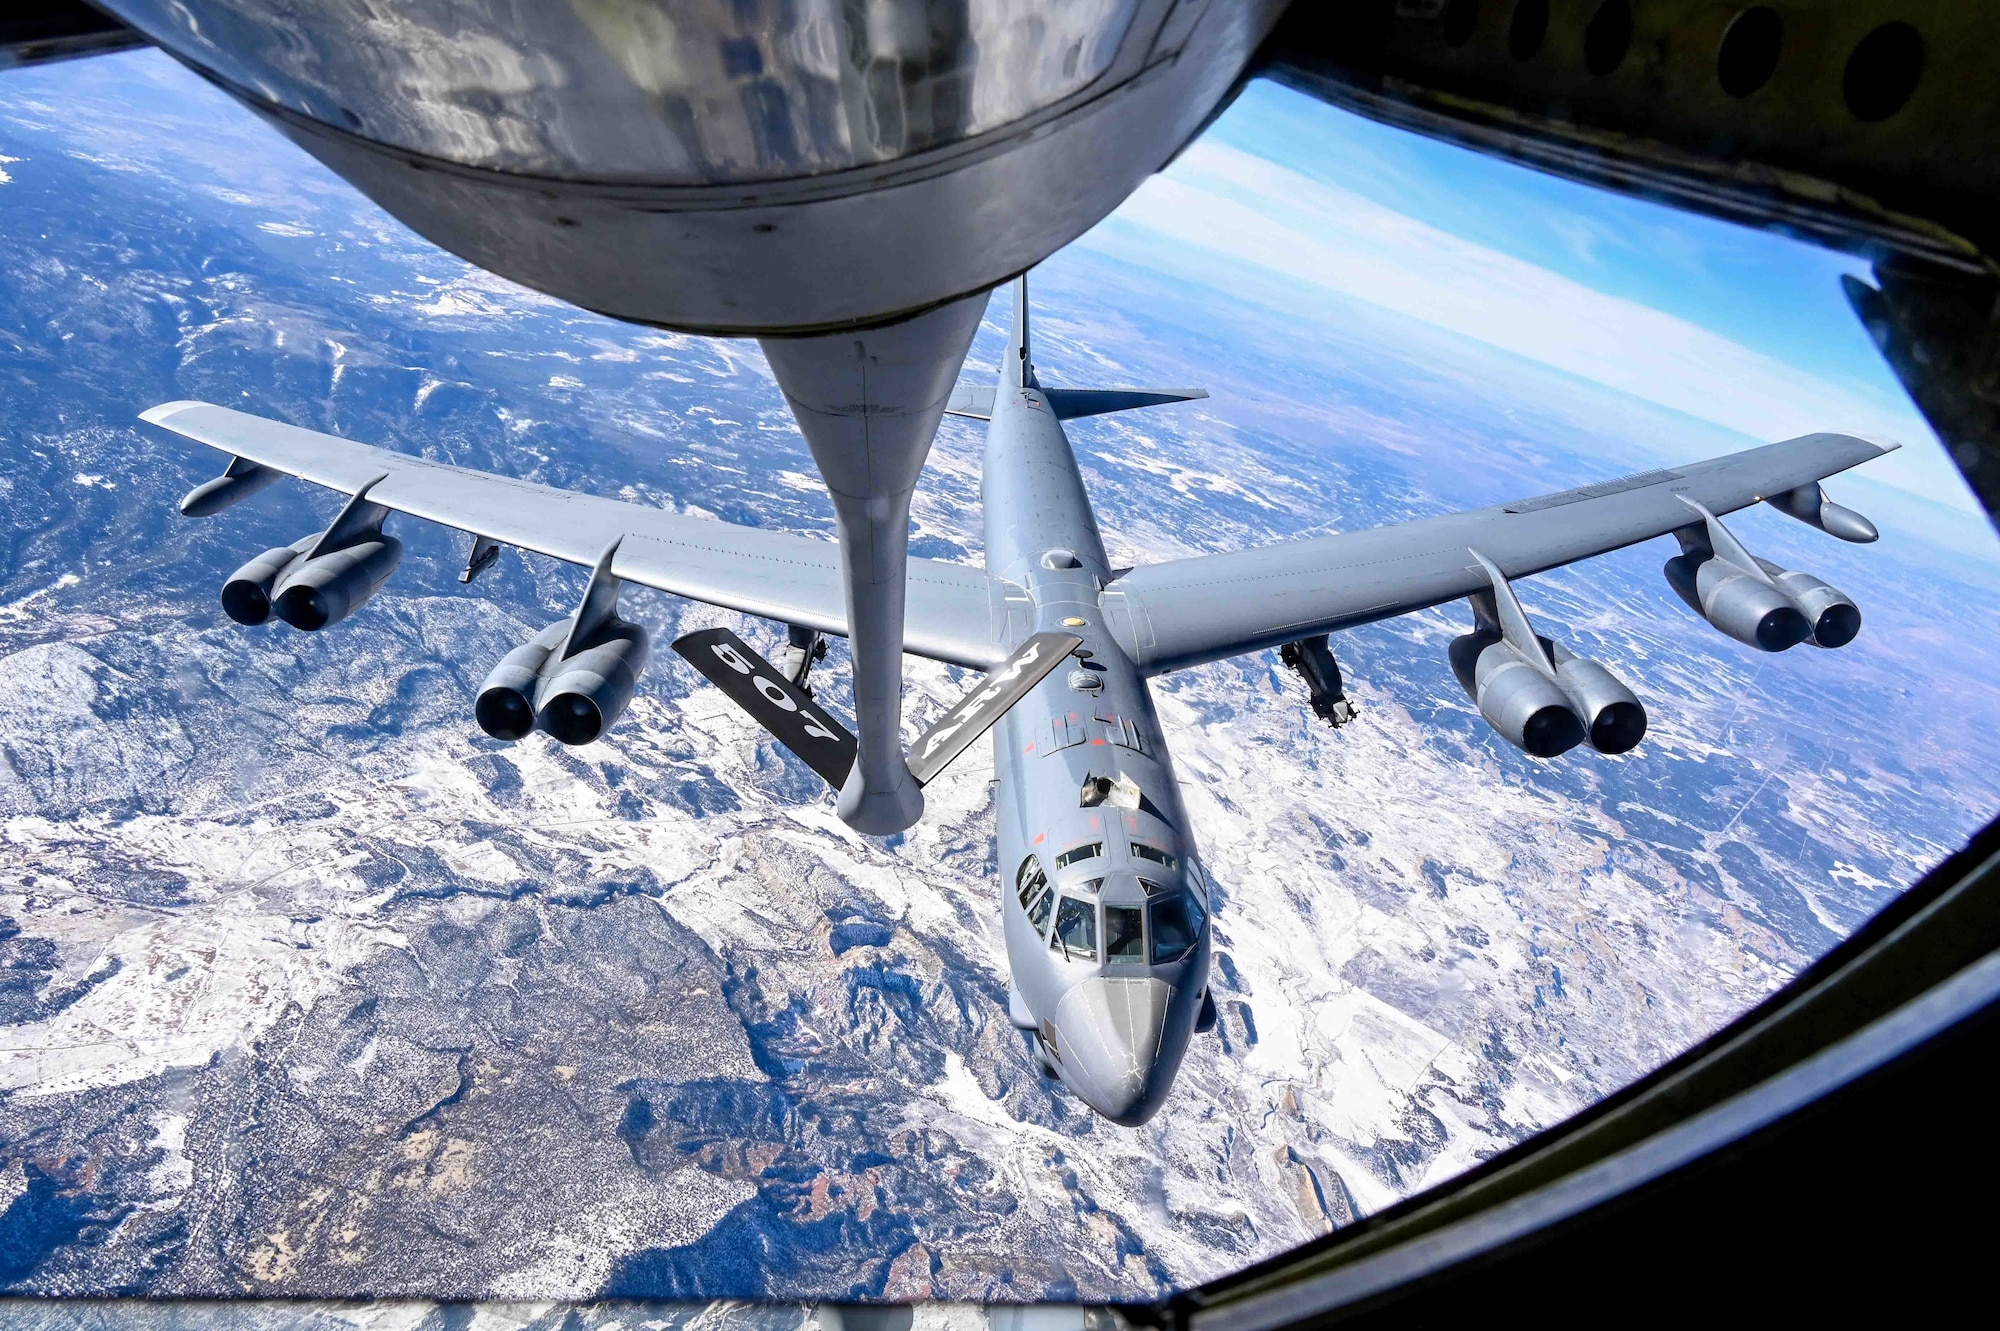 A B-52 Stratofortress assigned to the 96th Bomb Squadron Barksdale Air Force Base, Louisiana, prepares to refuel with a KC-135 Stratotanker assigned to the 465th Air Refueling Squadron, Tinker AFB, Oklahoma, above the Rocky Mountains, Dec. 13, 2021. Aerial refueling allows aircraft to travel vast distances without landing to bring airpower anytime, anywhere around the world. (U.S. Air Force photo by 2nd Lt. Mary Begy)